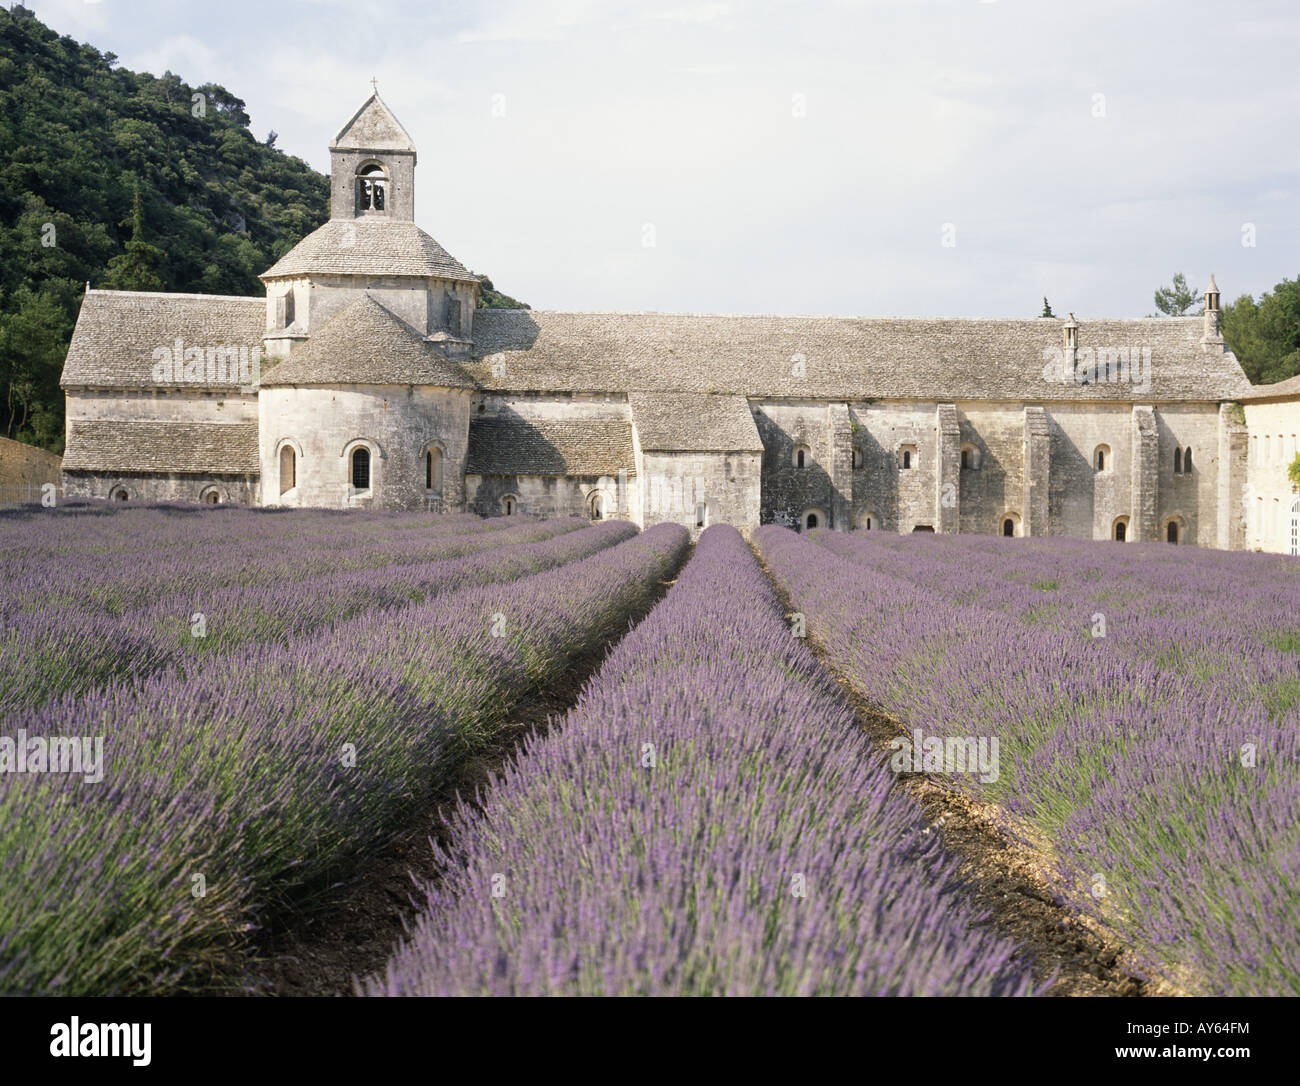 Senanque Abbey Historical church building and religious institution Round Tower Grey stone Rows of lavendar plants in flower Stock Photo